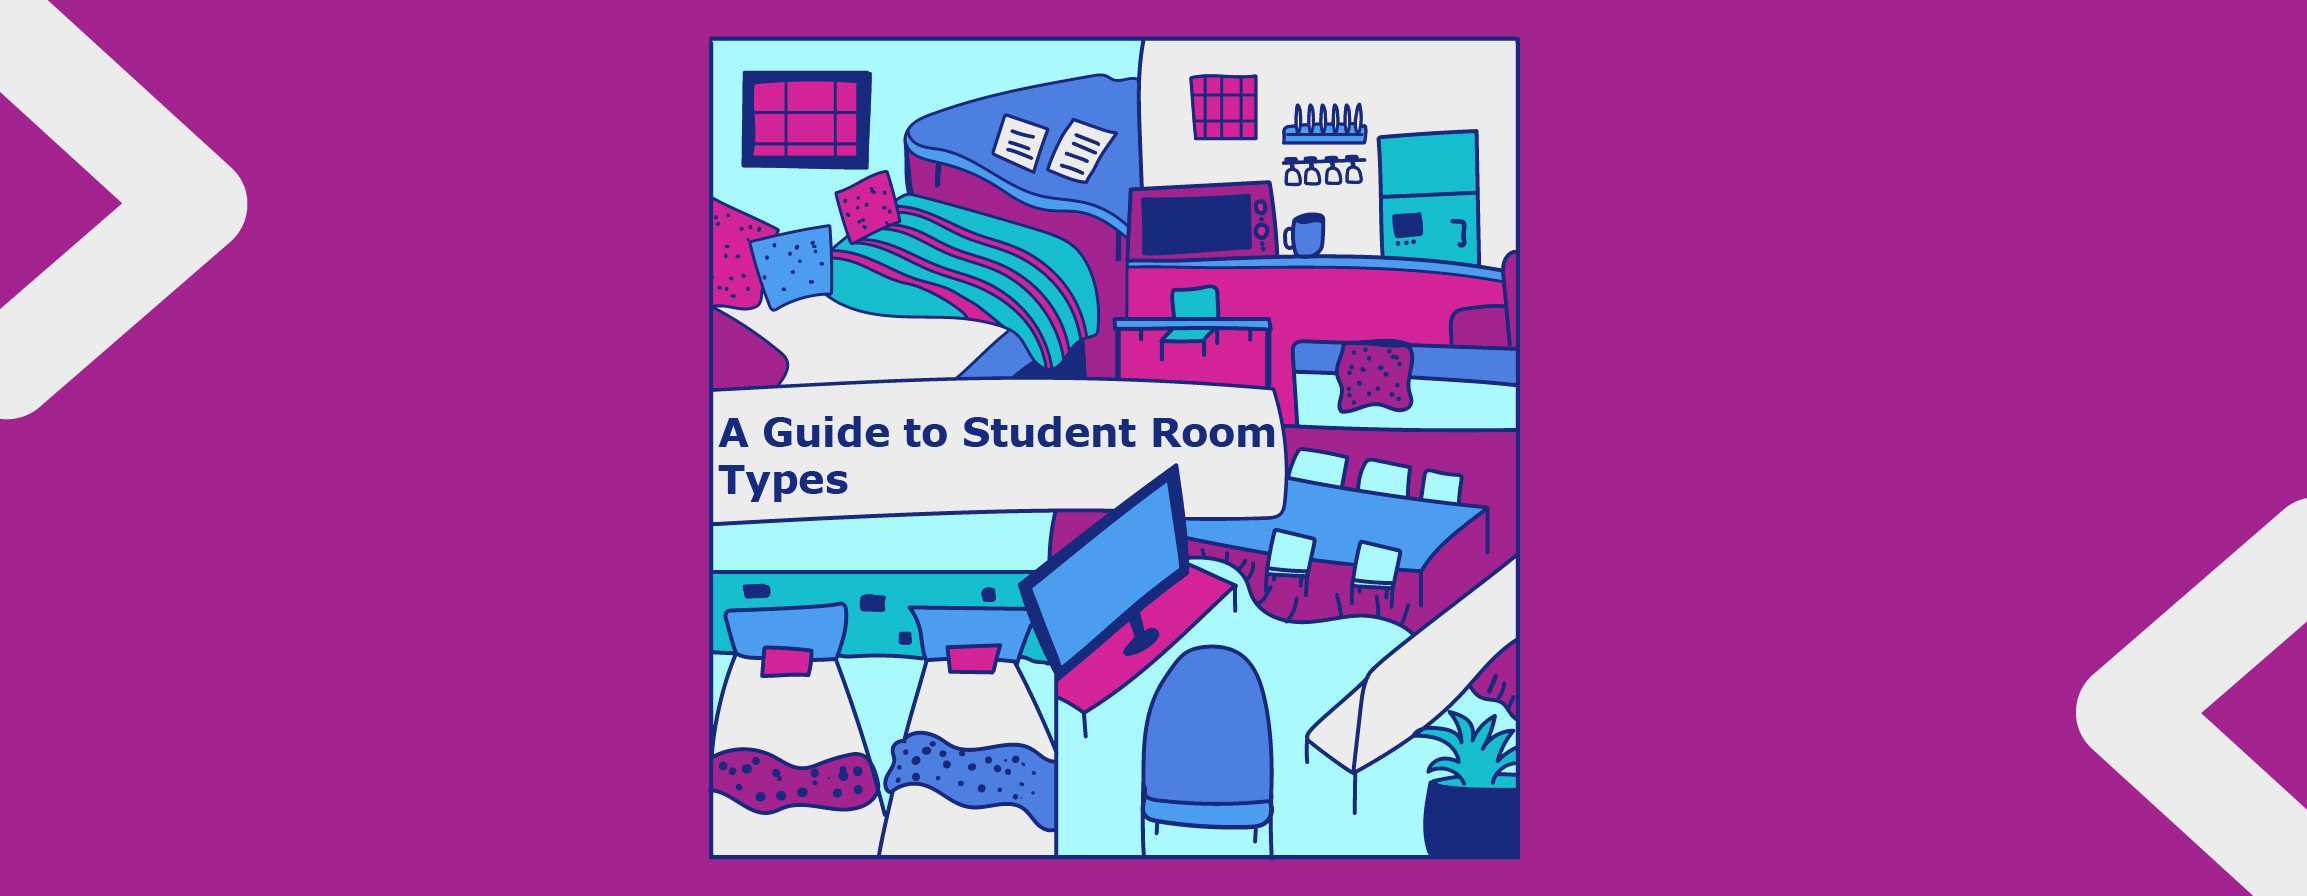 A guide to Student Room Types in the UK